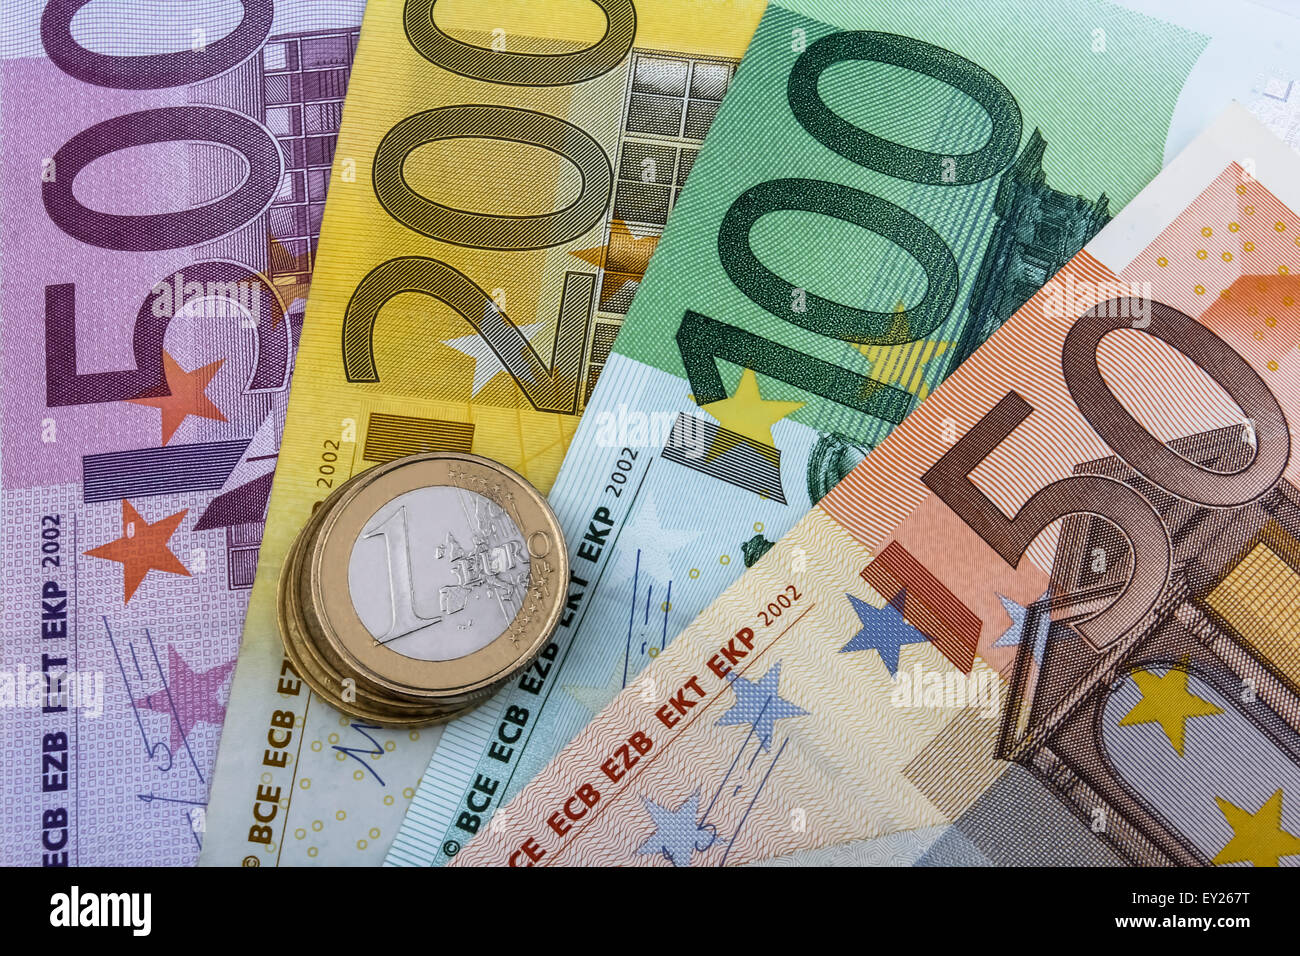 Euros (EUR) coins and notes. 50, 100, 200 and 500 Euro note with a few Euro coins on top. Stock Photo